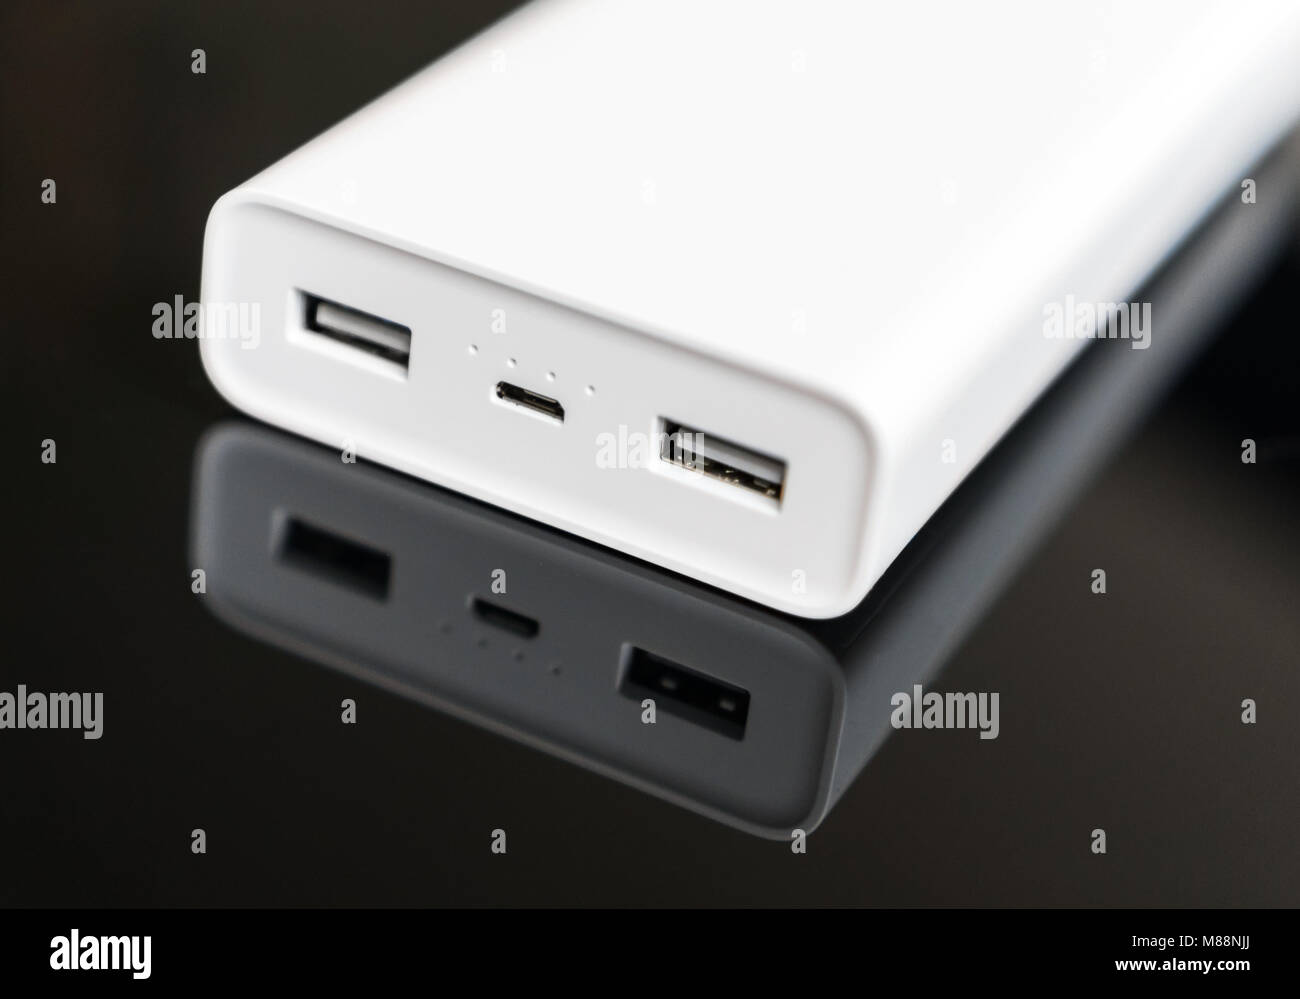 White power bank on mirrored surface. Space for your text. Stock Photo